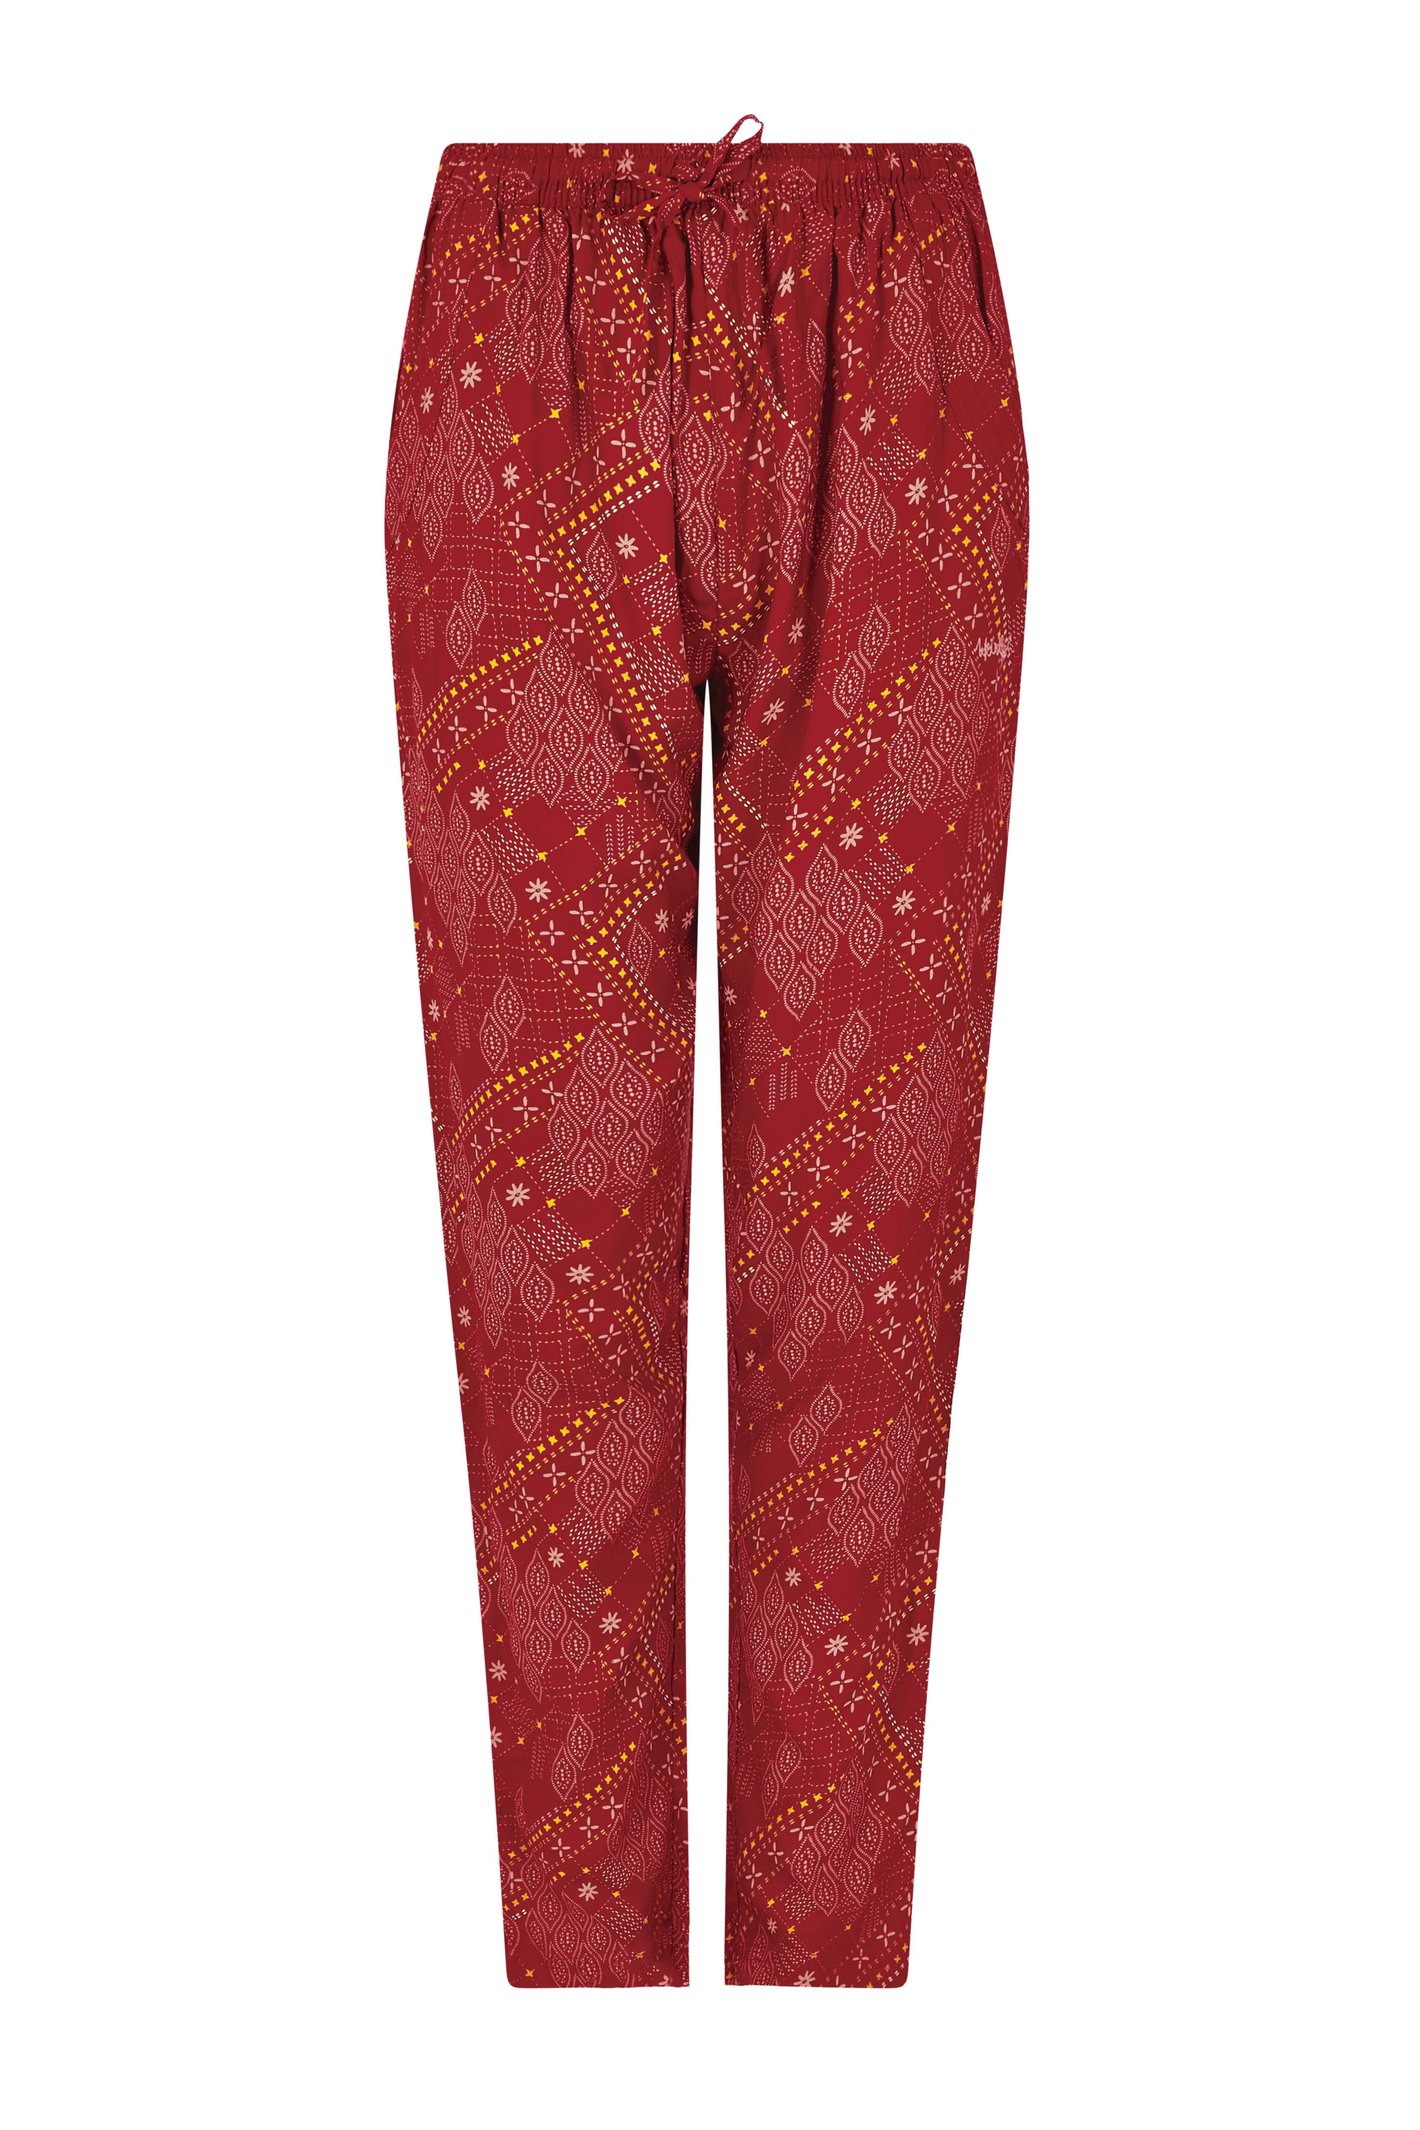 Weird Fish Tinto Eco Viscose Printed Trousers Chilli Red Size 16